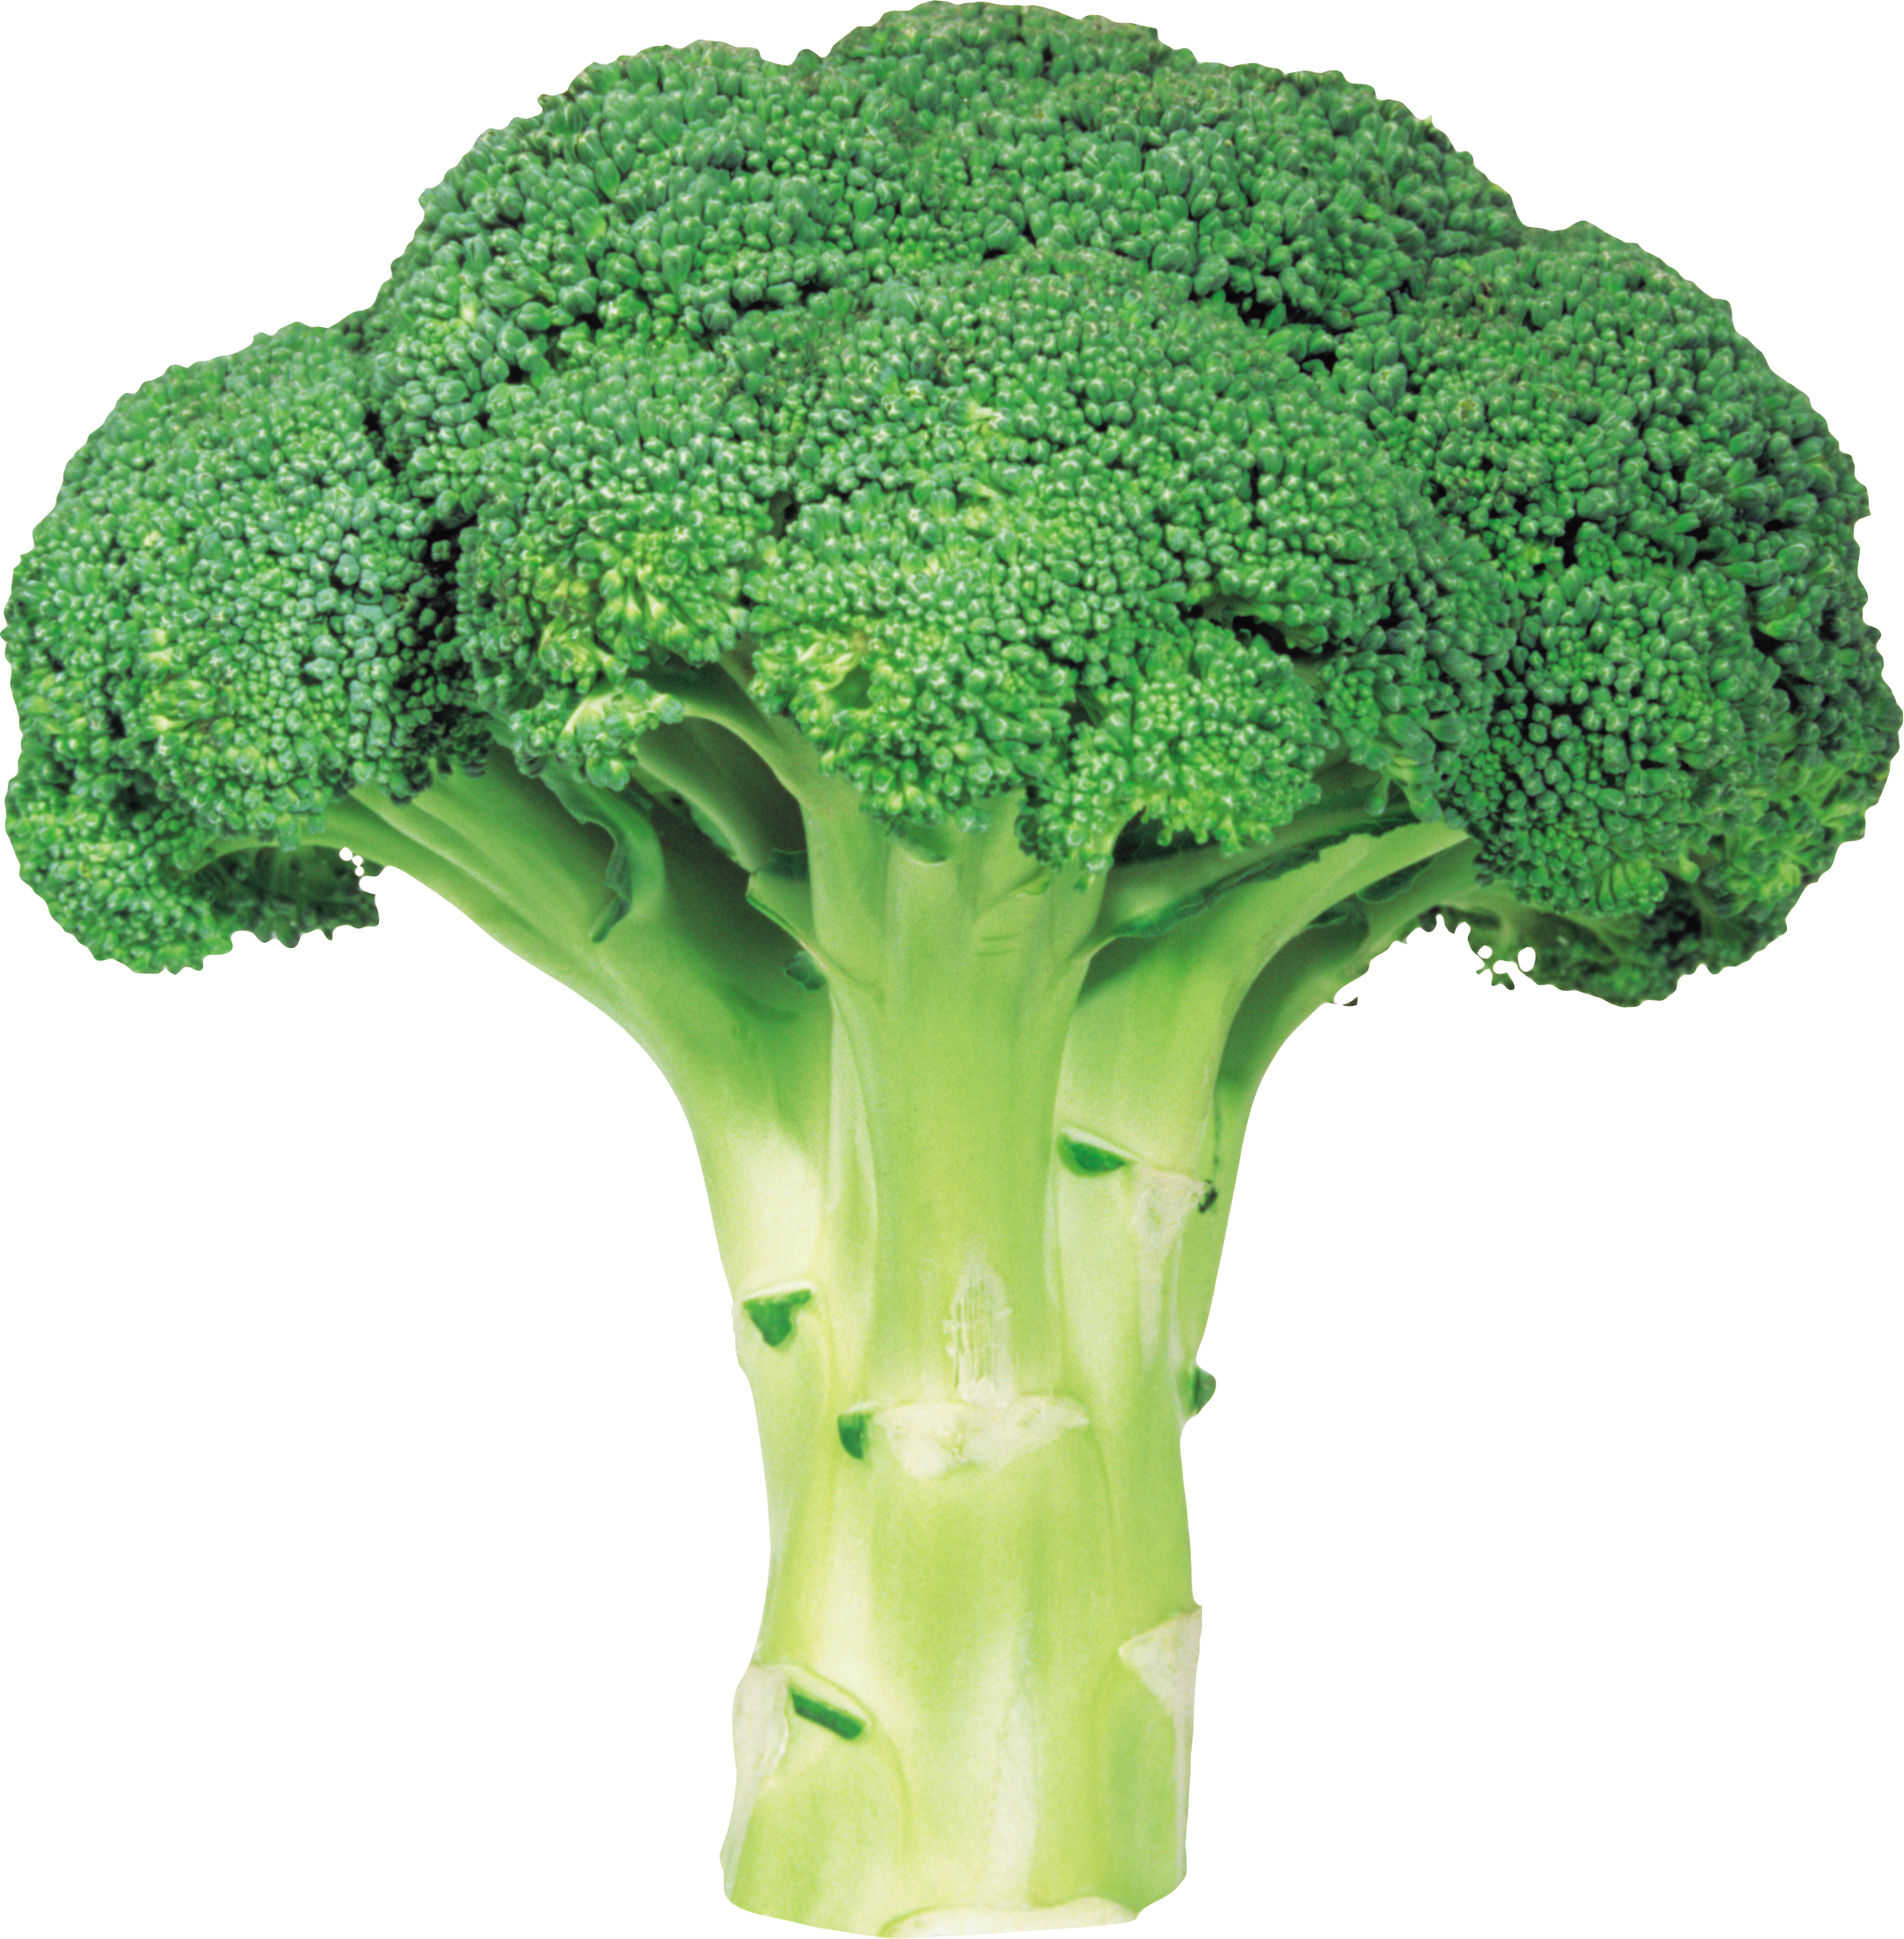 Vegetable png image with. Broccoli clipart transparent background